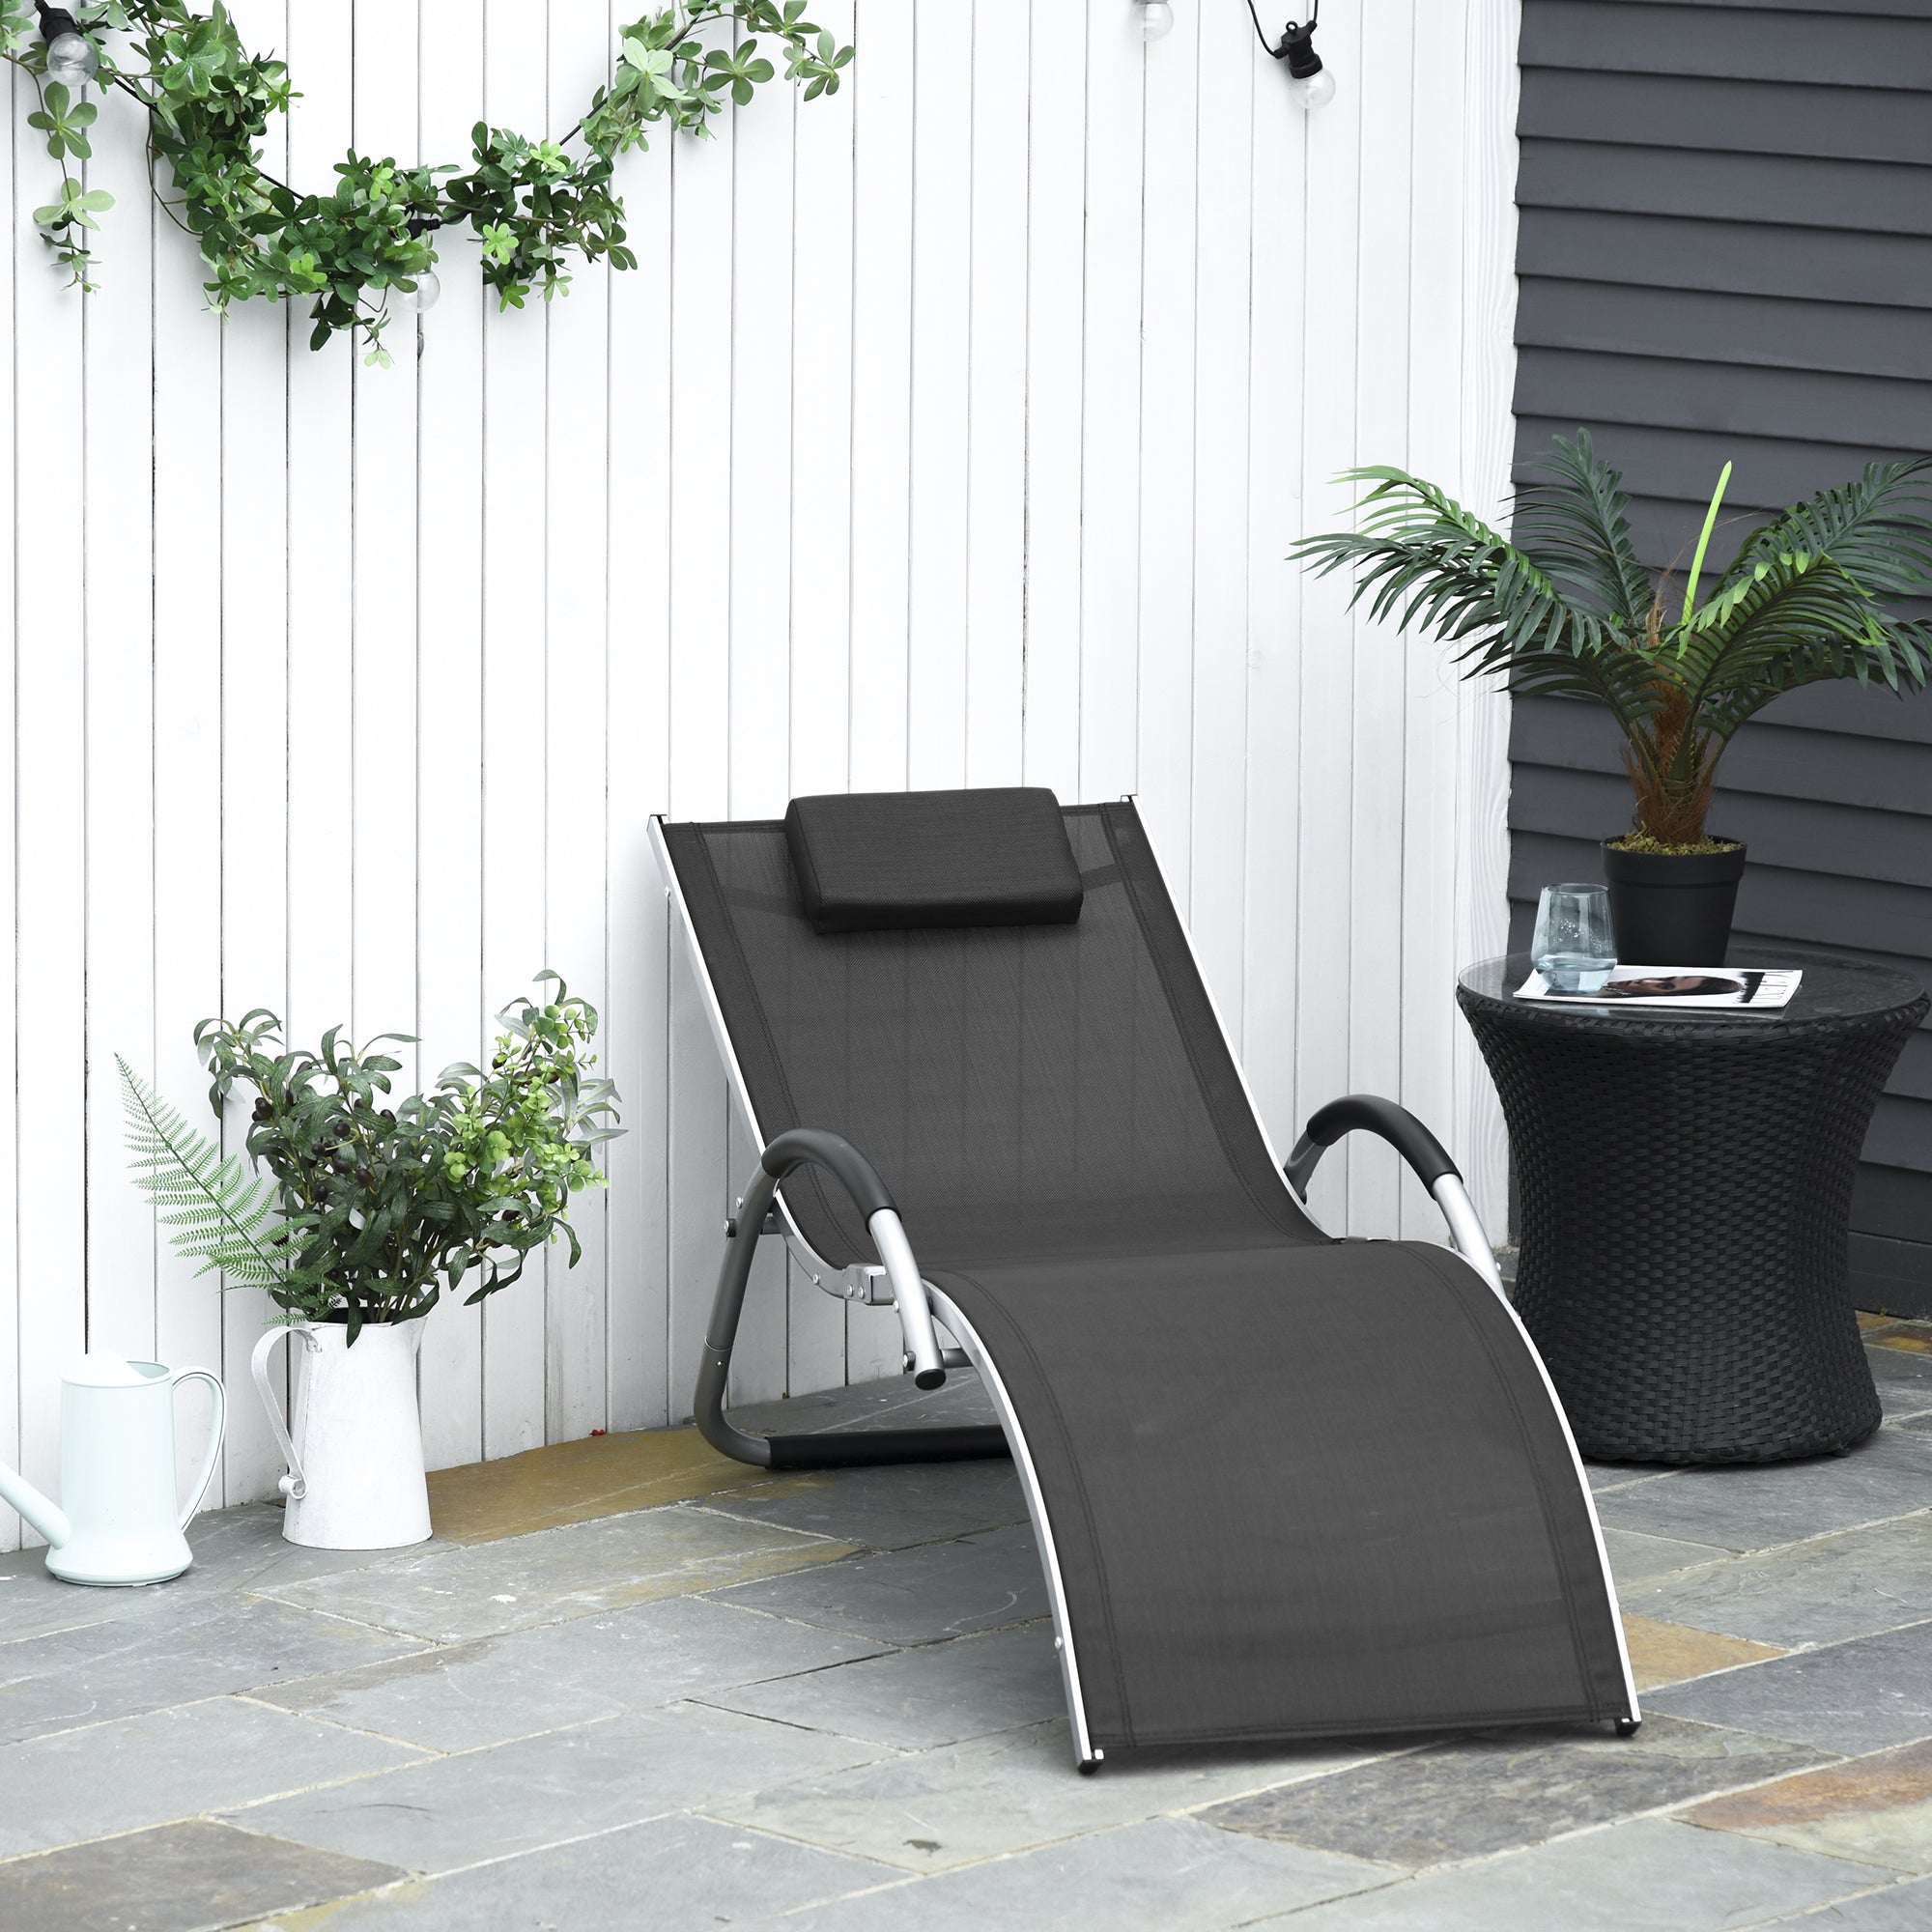 Outsunny Ergonomic Lounger Chair Portable Armchair with Removable Headrest Pillow for Garden Patio Outside All Aluminium Frame Black - Inspirely